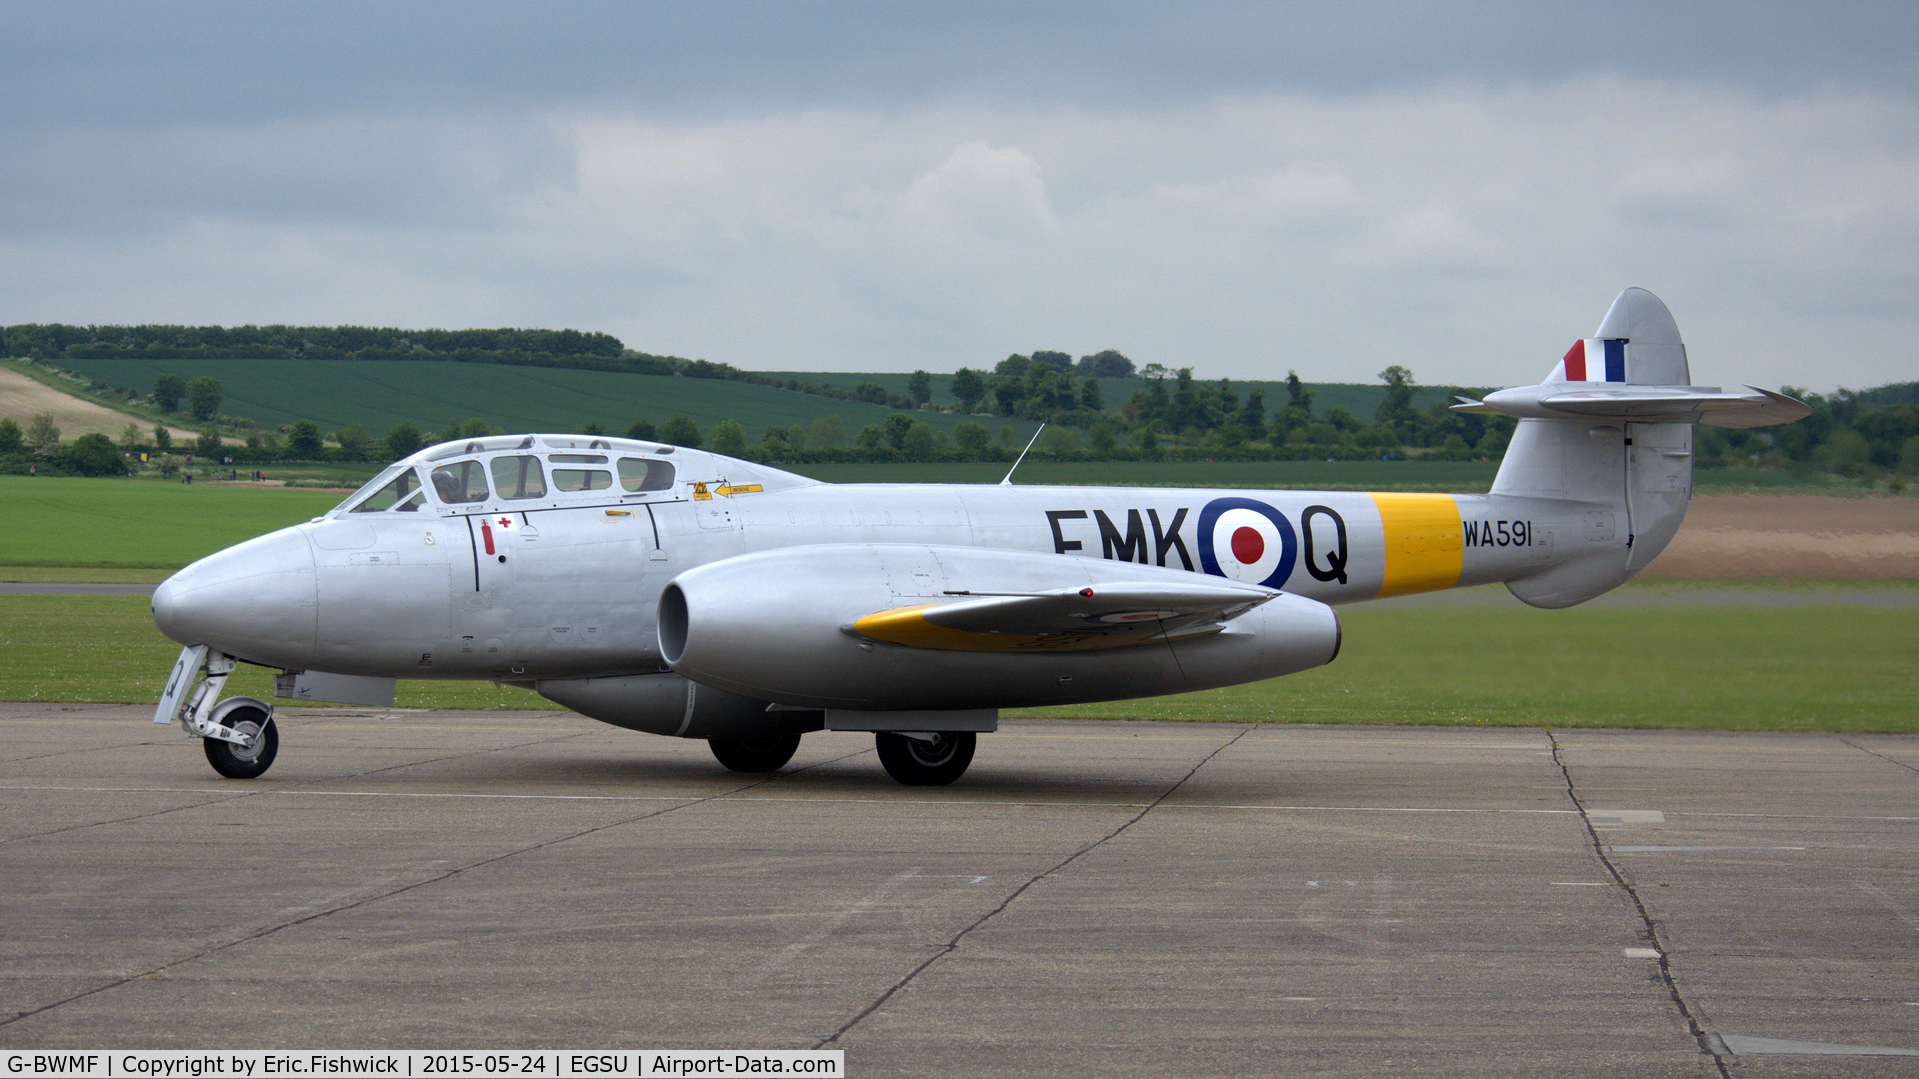 G-BWMF, 1949 Gloster Meteor T.7 C/N G5/356460, 1. G-BWMF (WA591) at The IWM VE Day Anniversary Air Show, May 2015. 